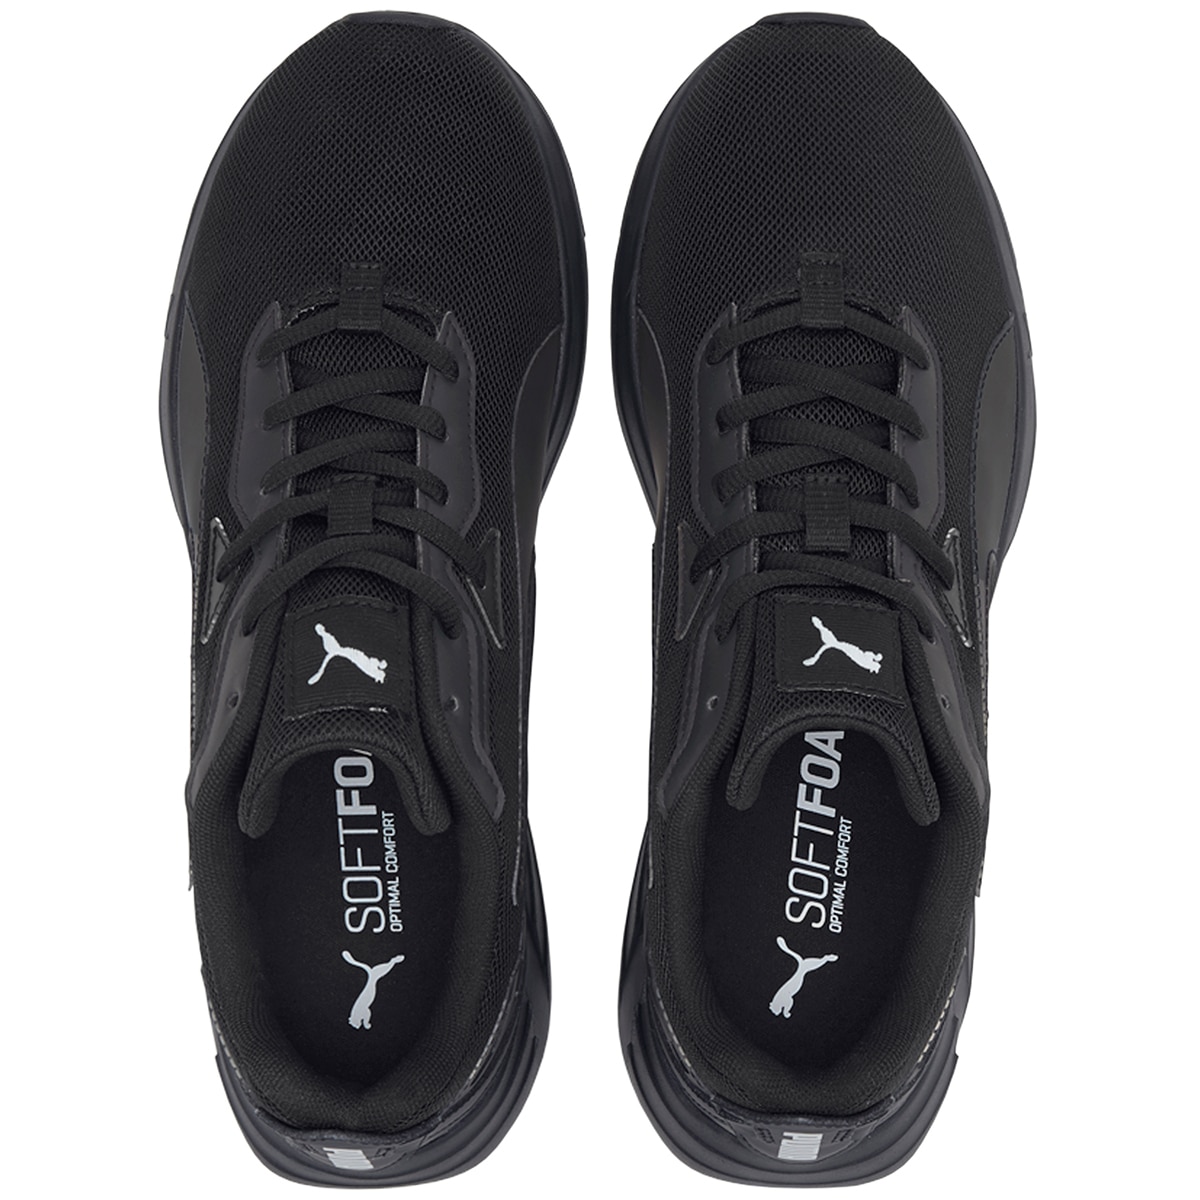 47 Casual Costco men s athletic shoes for Women